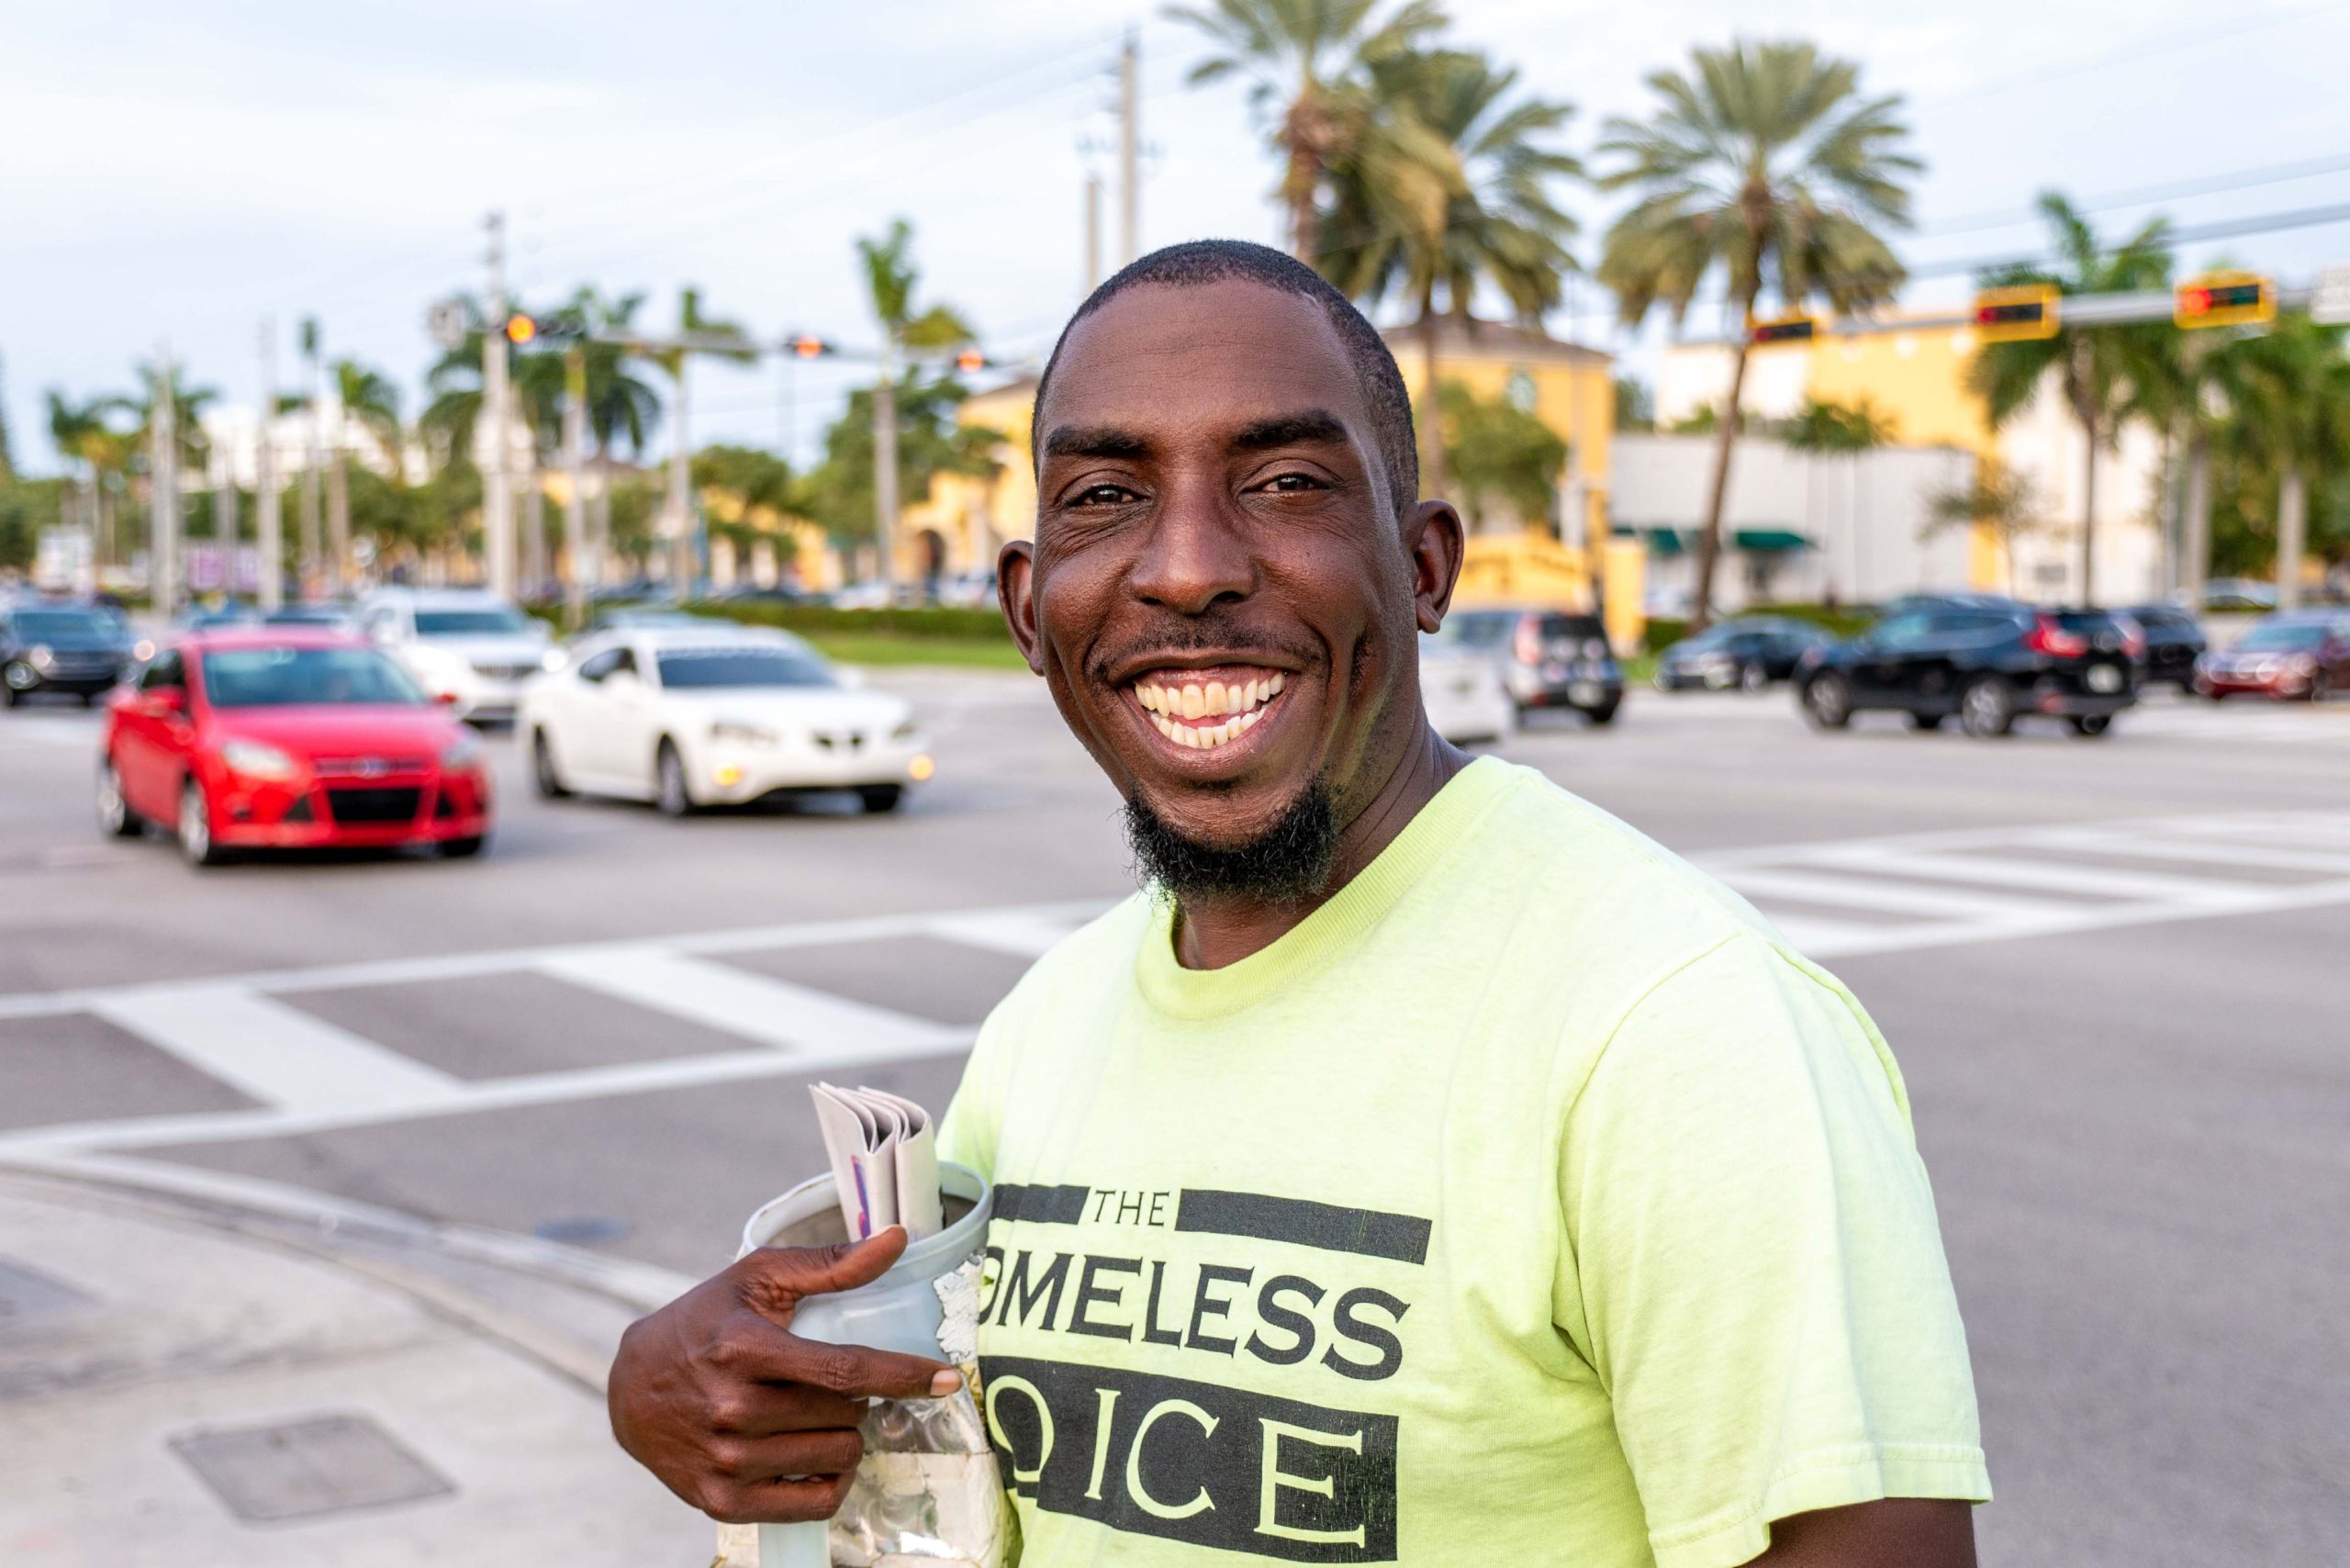 Michael White: Homeless Voice Vendor and Author